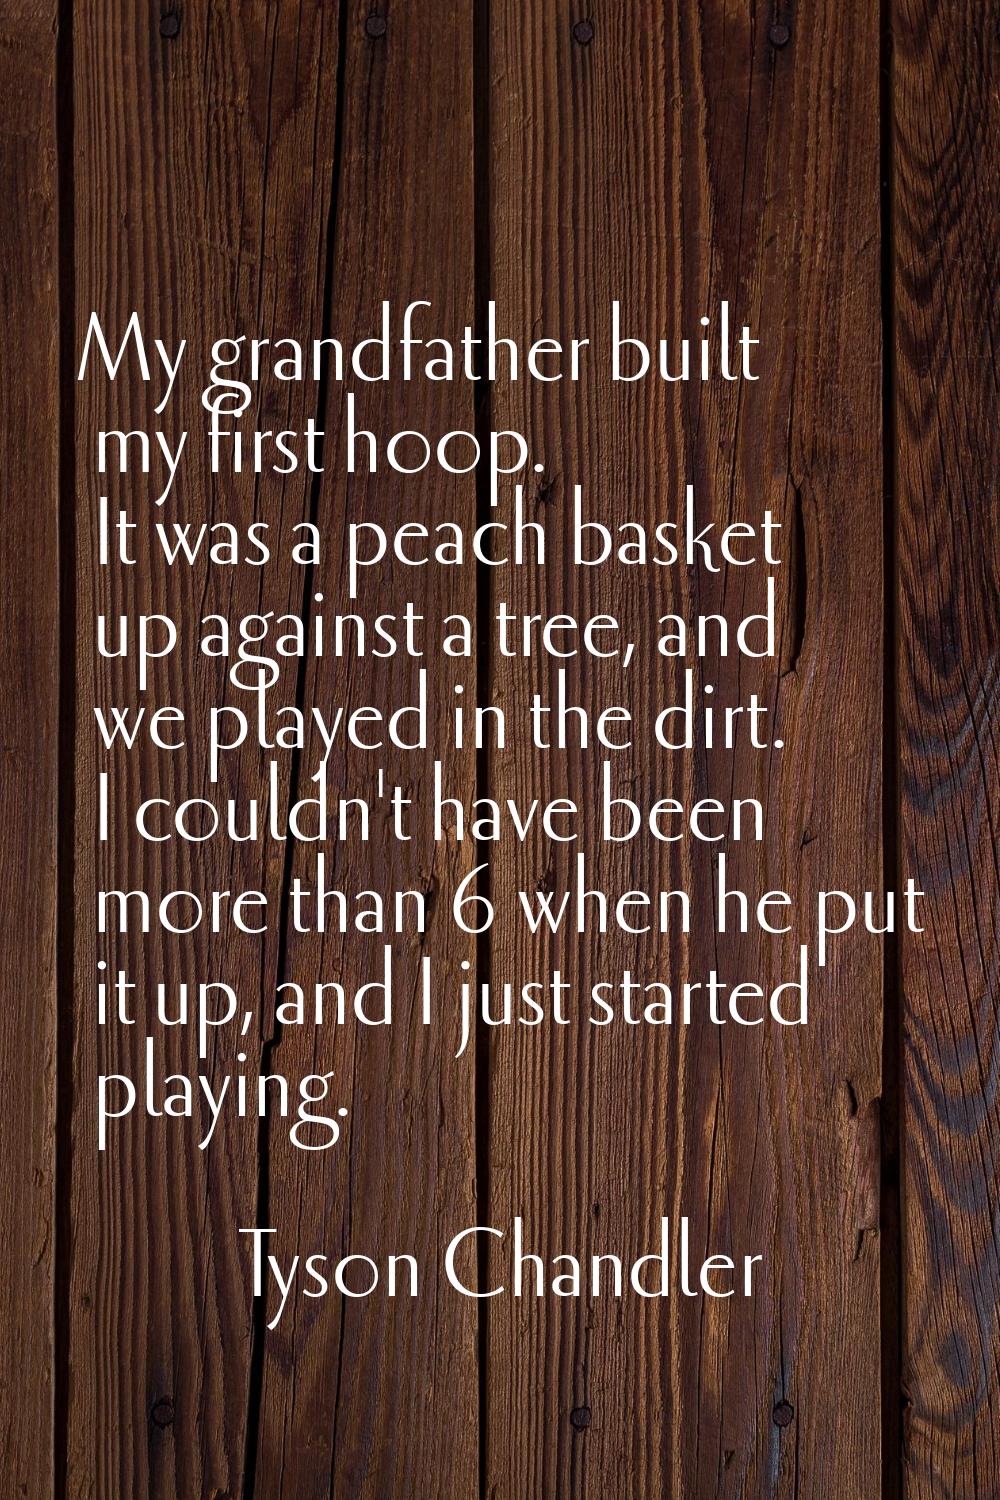 My grandfather built my first hoop. It was a peach basket up against a tree, and we played in the d